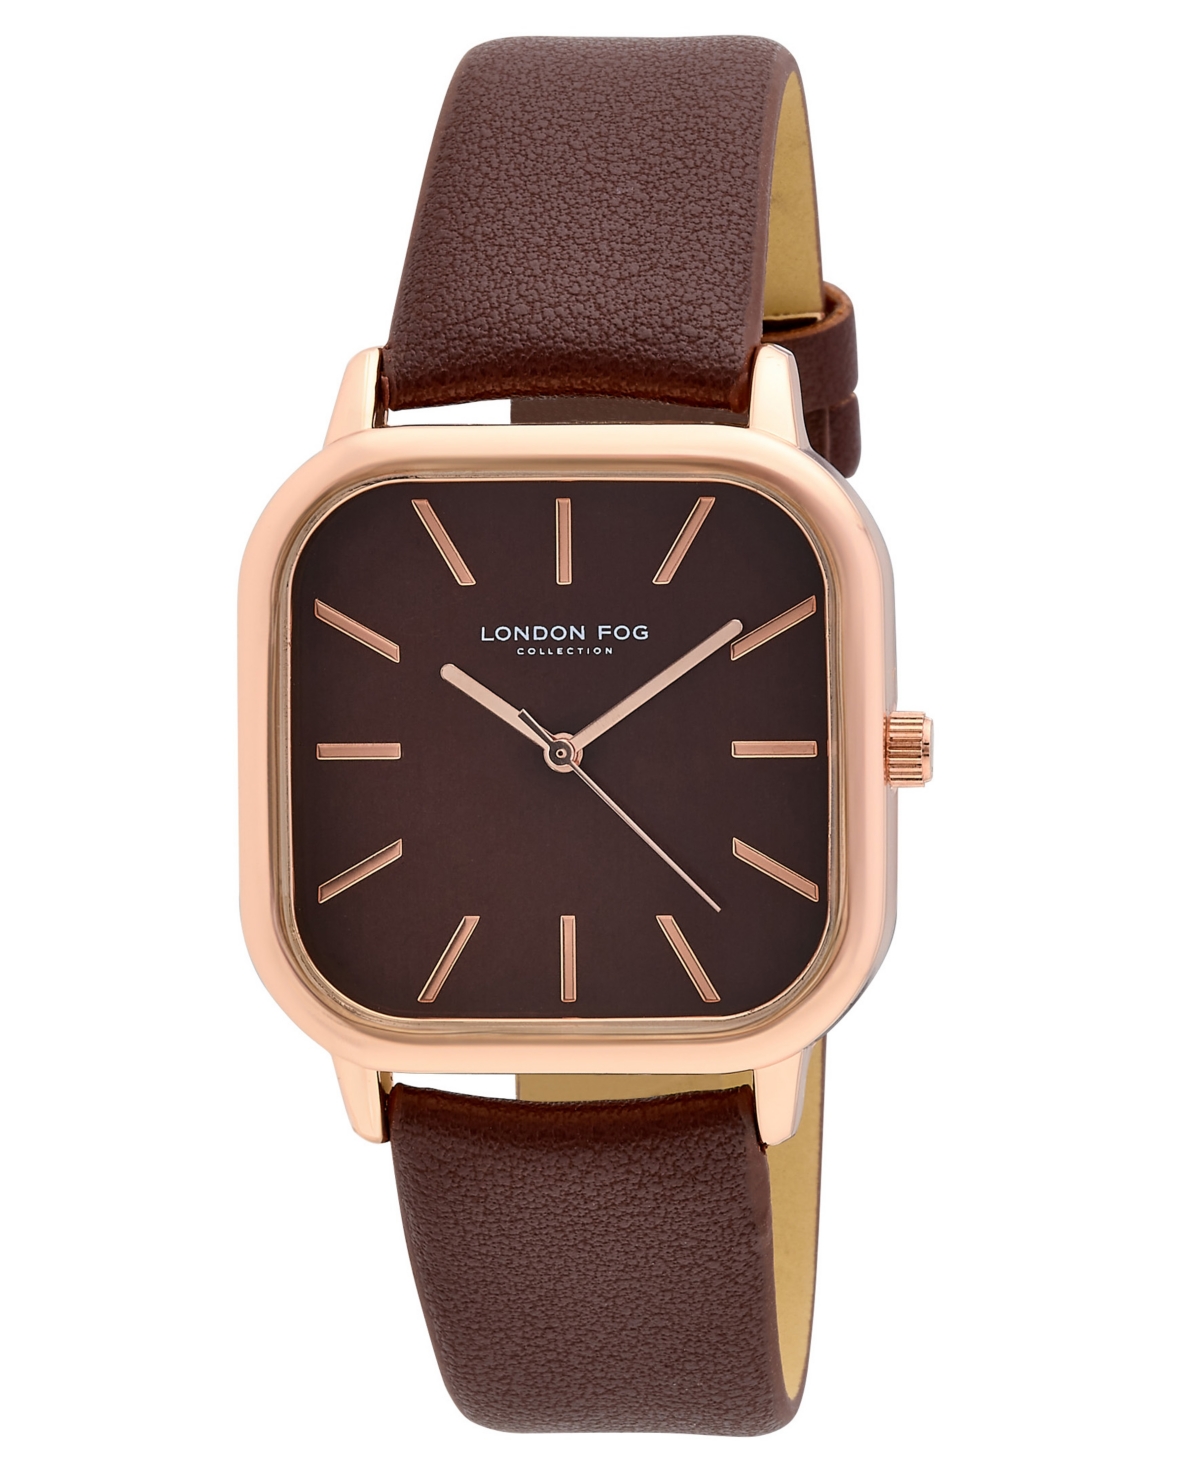 London Fog Square Grove Brown Faux Leather Watch 35mm